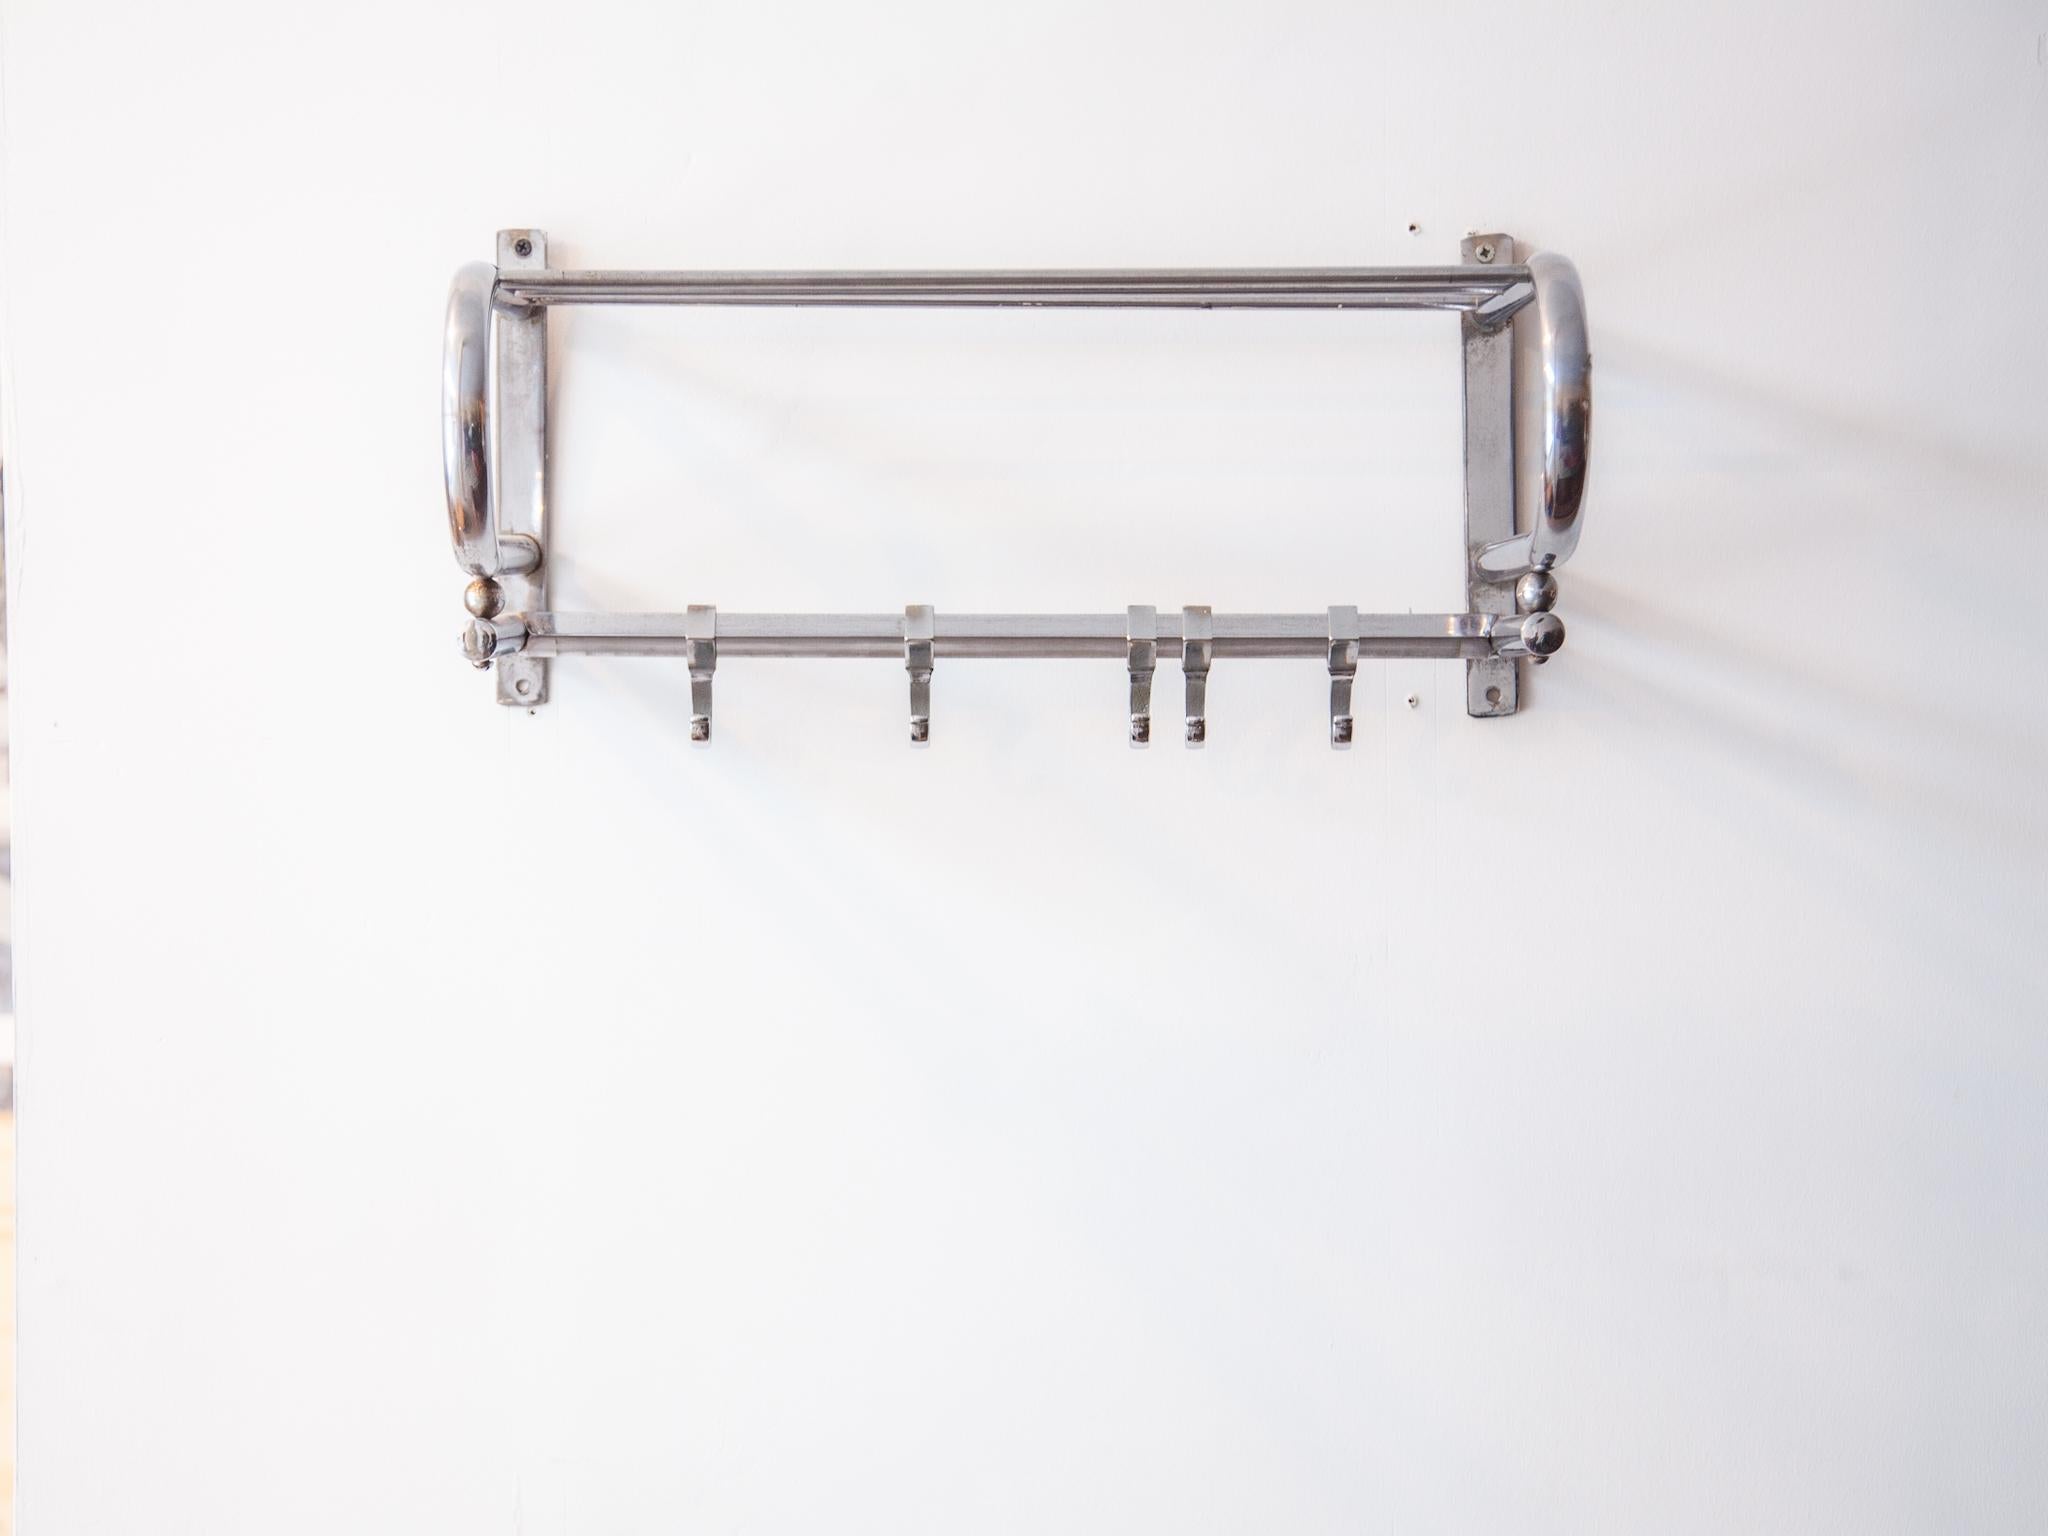 Bauhaus Wall hanging coat rack 1950s, Belgium, vintage chrome wall hanging coat rack with five chrome hooks. Perfect for small homes when everything’s in harmony and organized, even the tiniest space can feel expansive and refreshingly Minimalist.